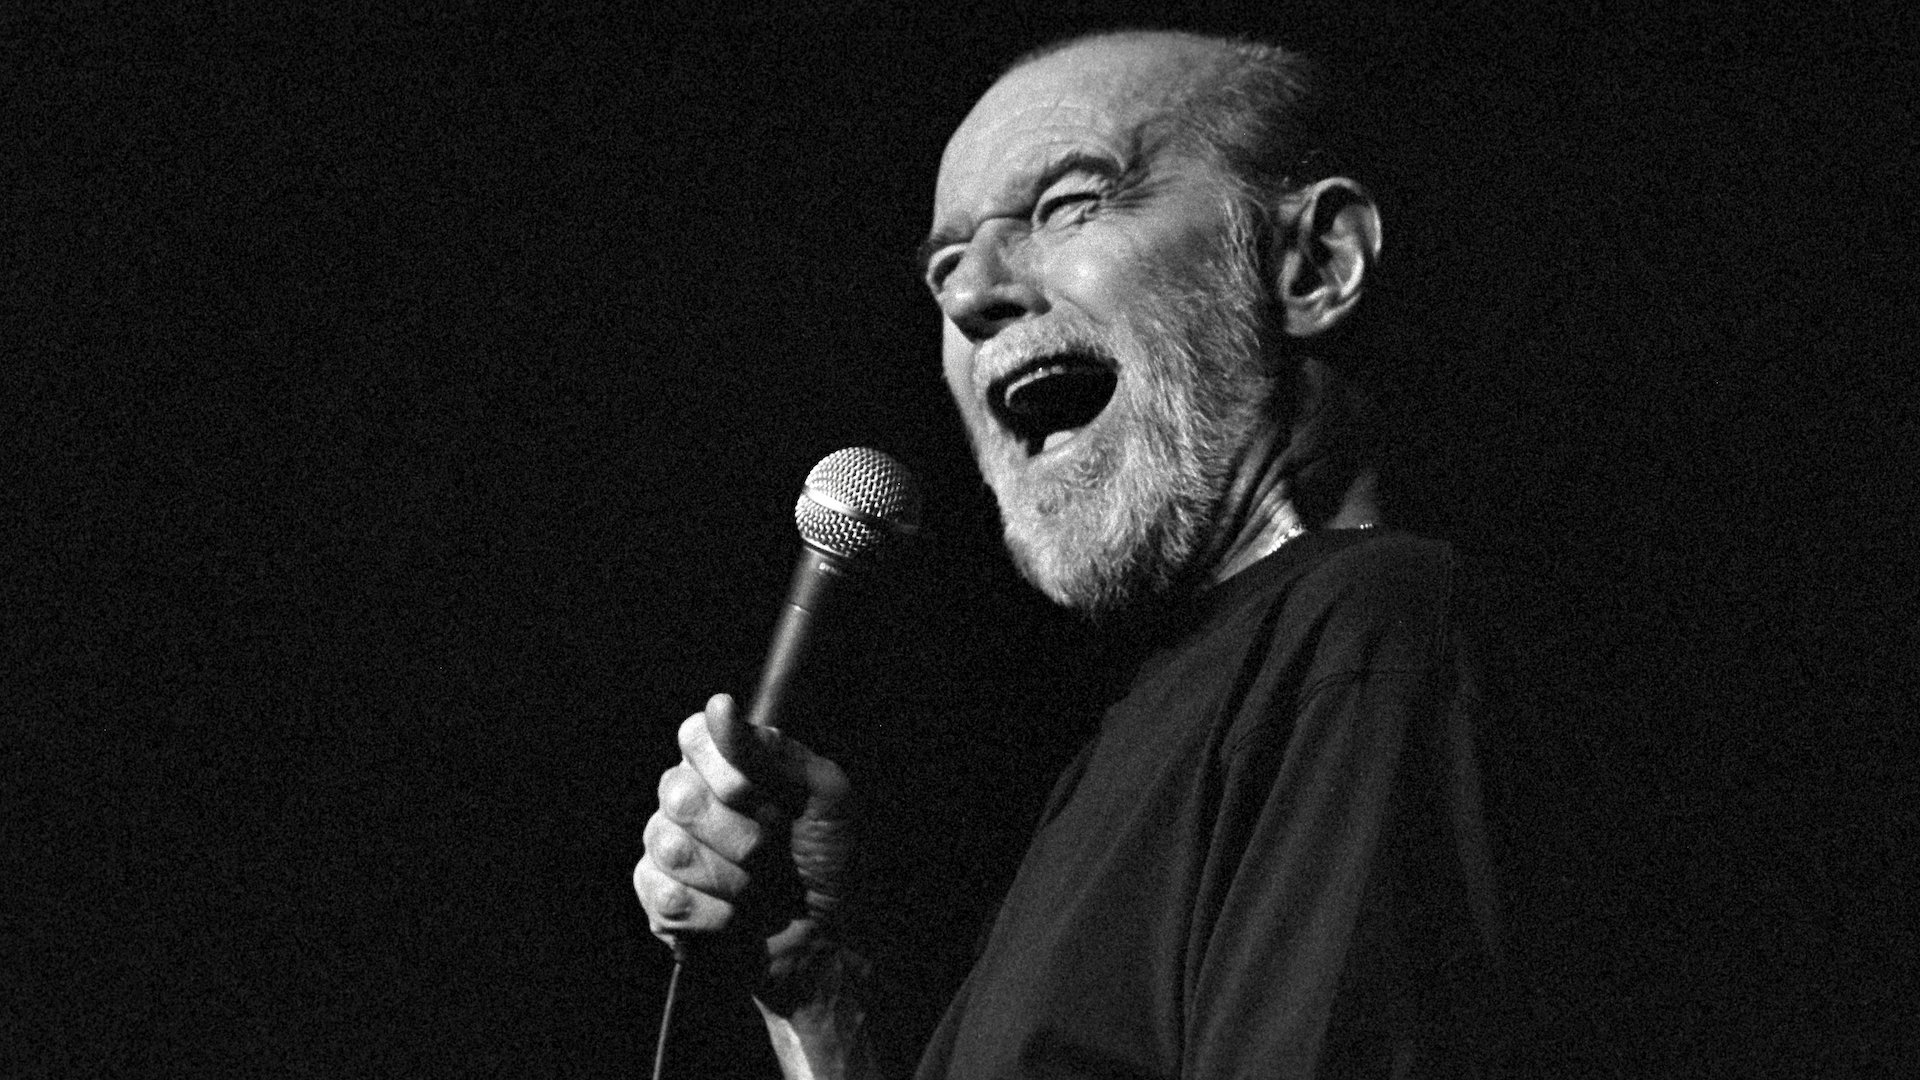 George Carlin performs a standup routine.